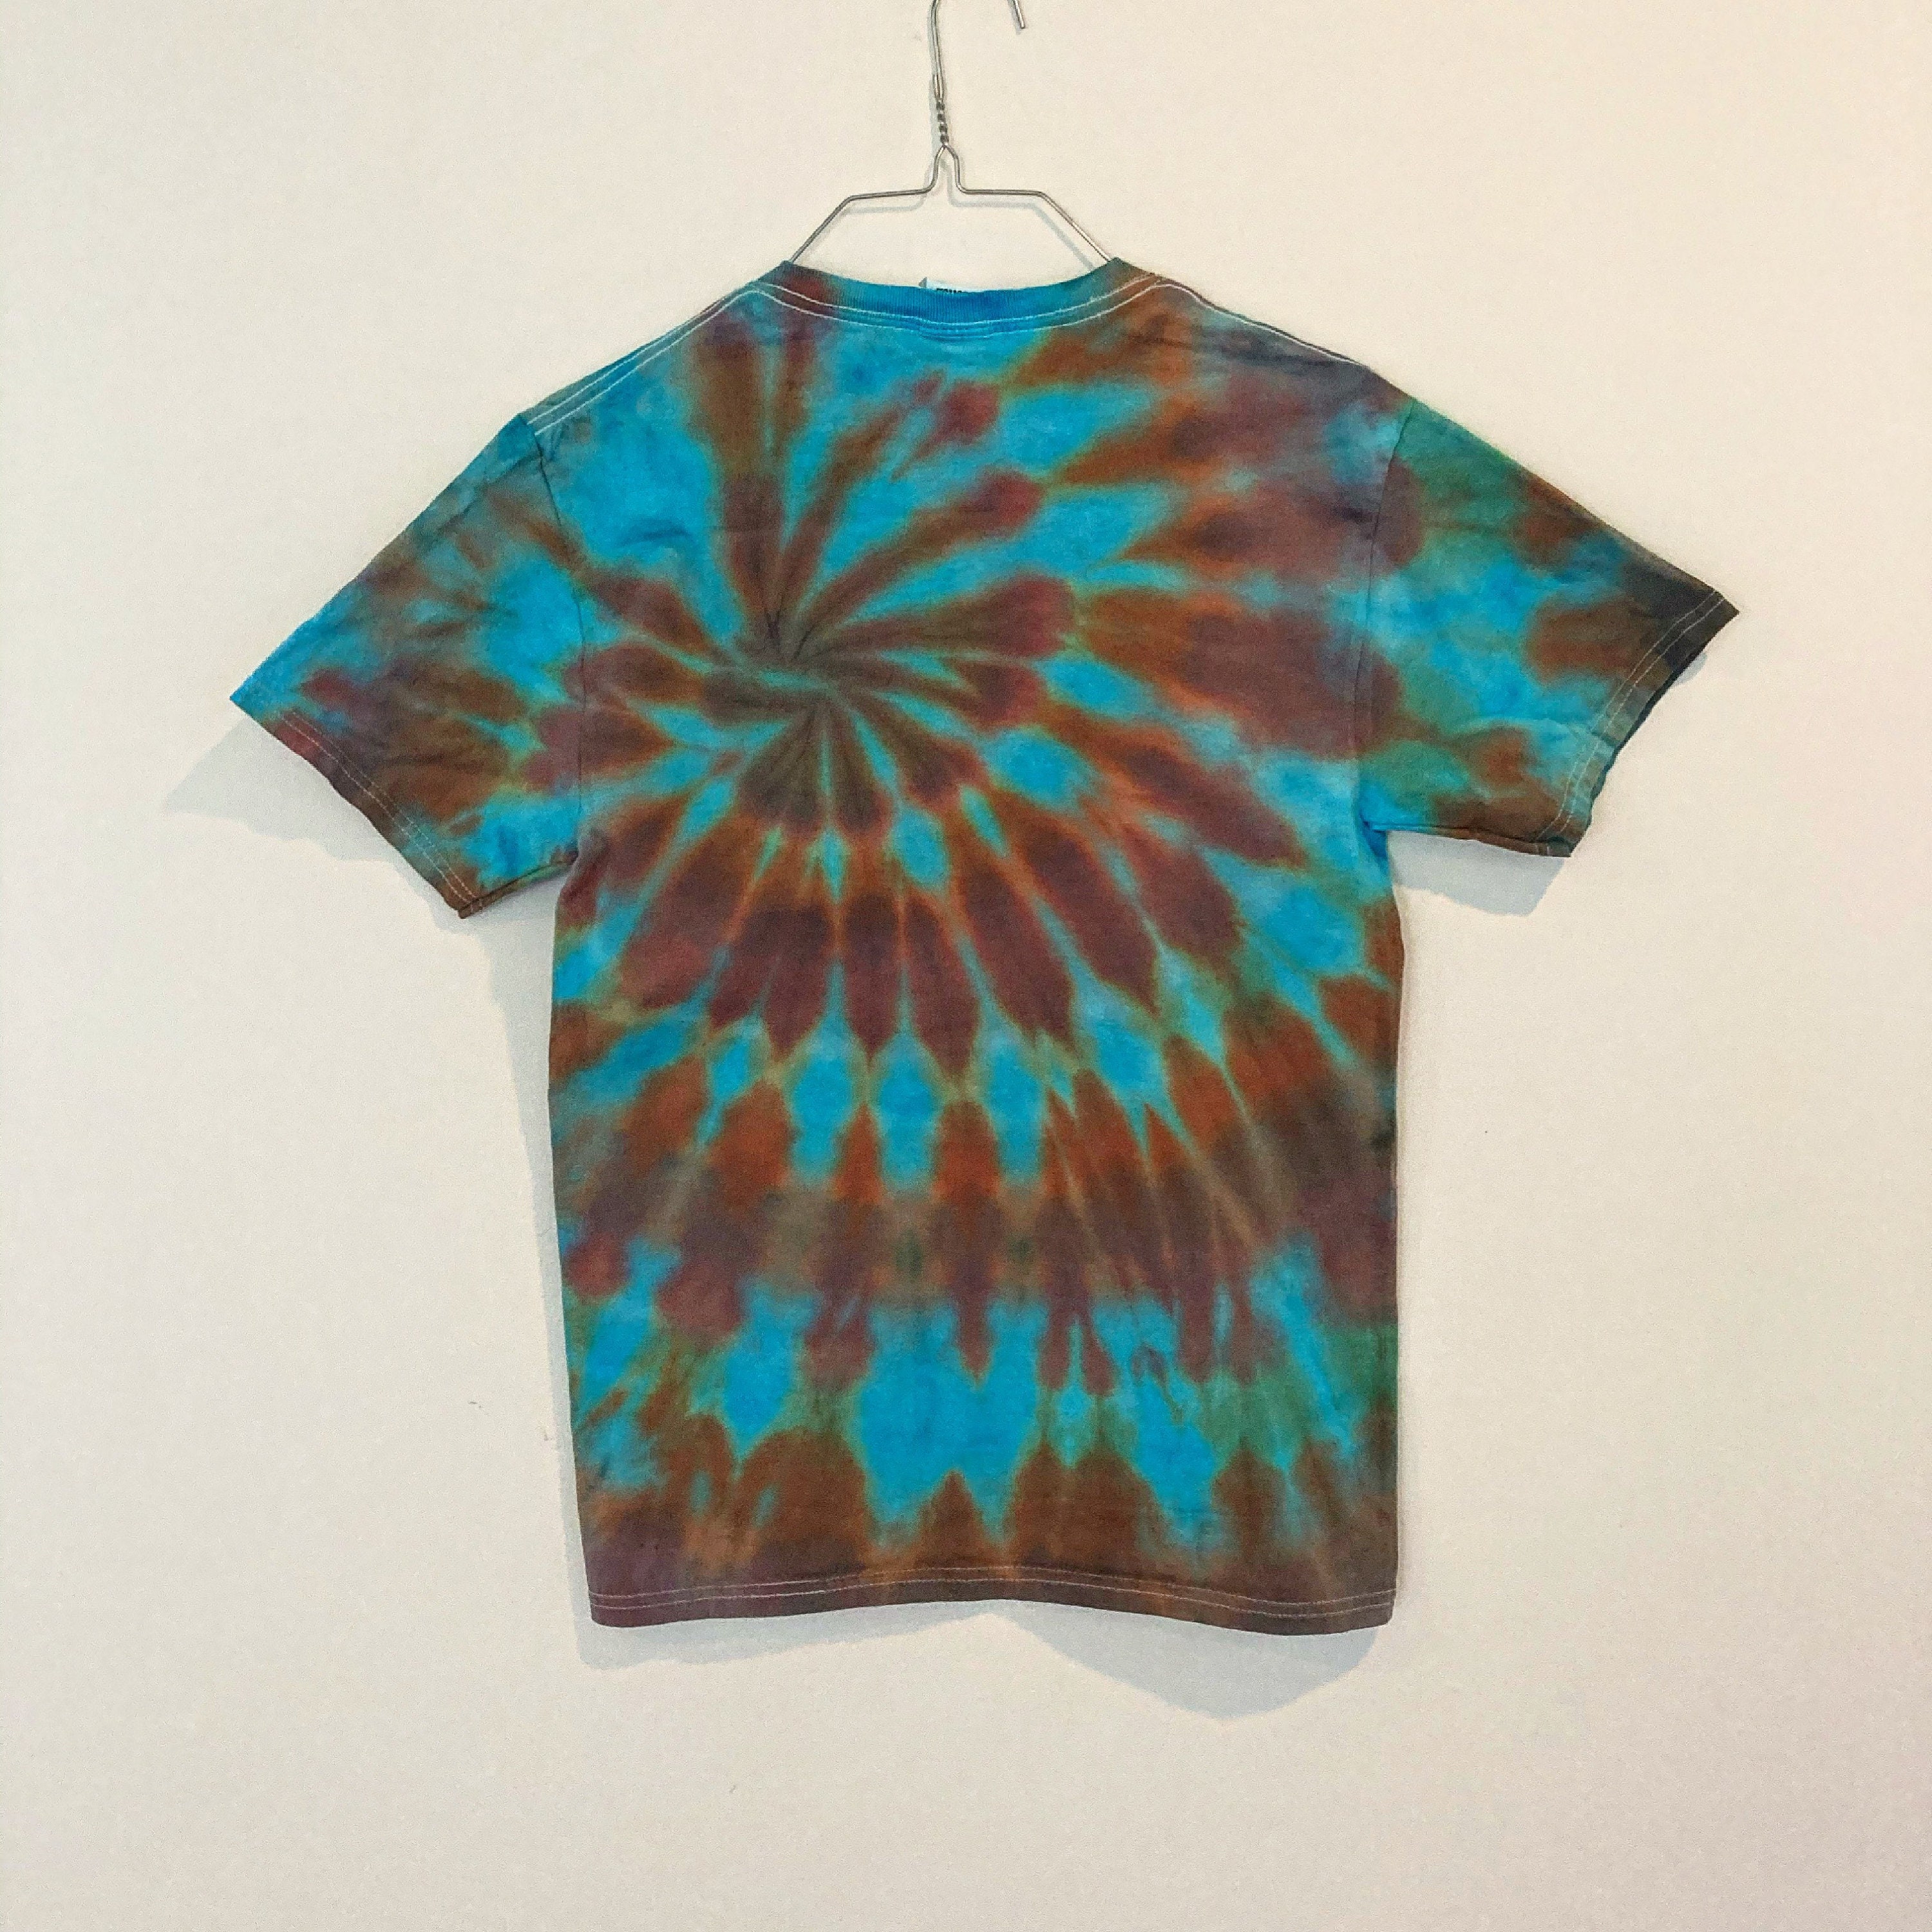 Adult Small Tie Dye, Festival Clothing, Hippie Clothes, Psychedelic ...